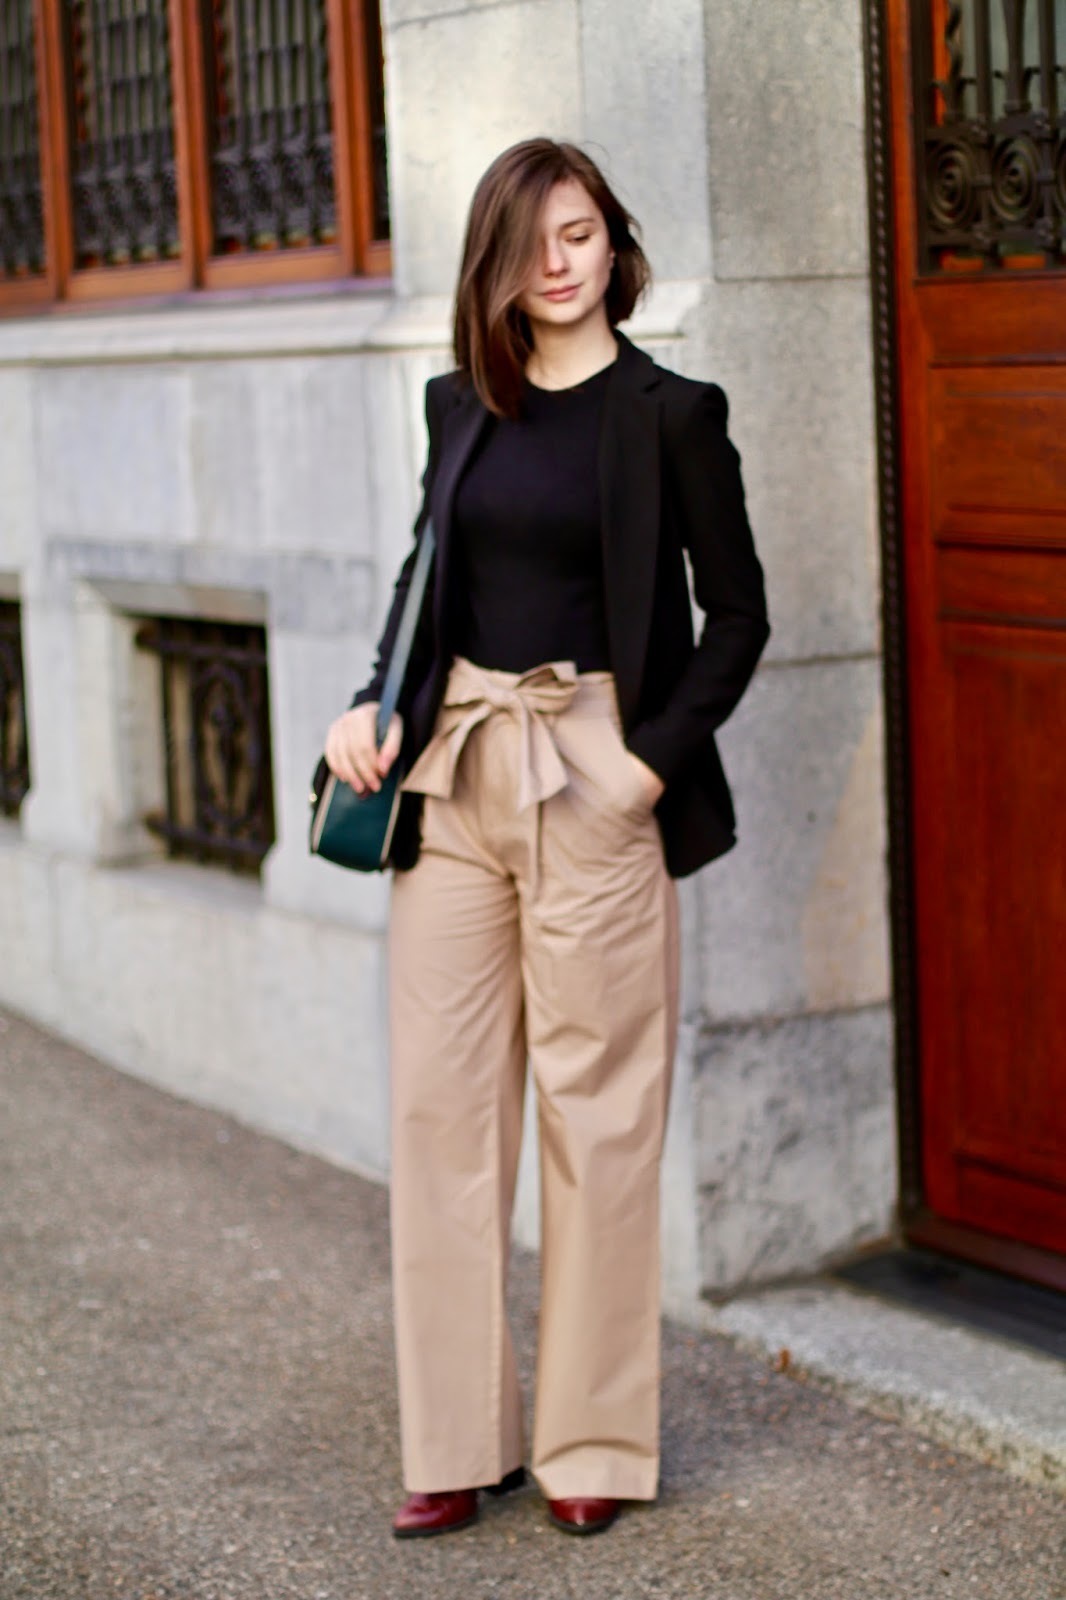 Style Pantry | Power Suit: Fitted Blazer + Contrast Waist Pants | Pantsuits  for women, Stylish work attire, Suits for women